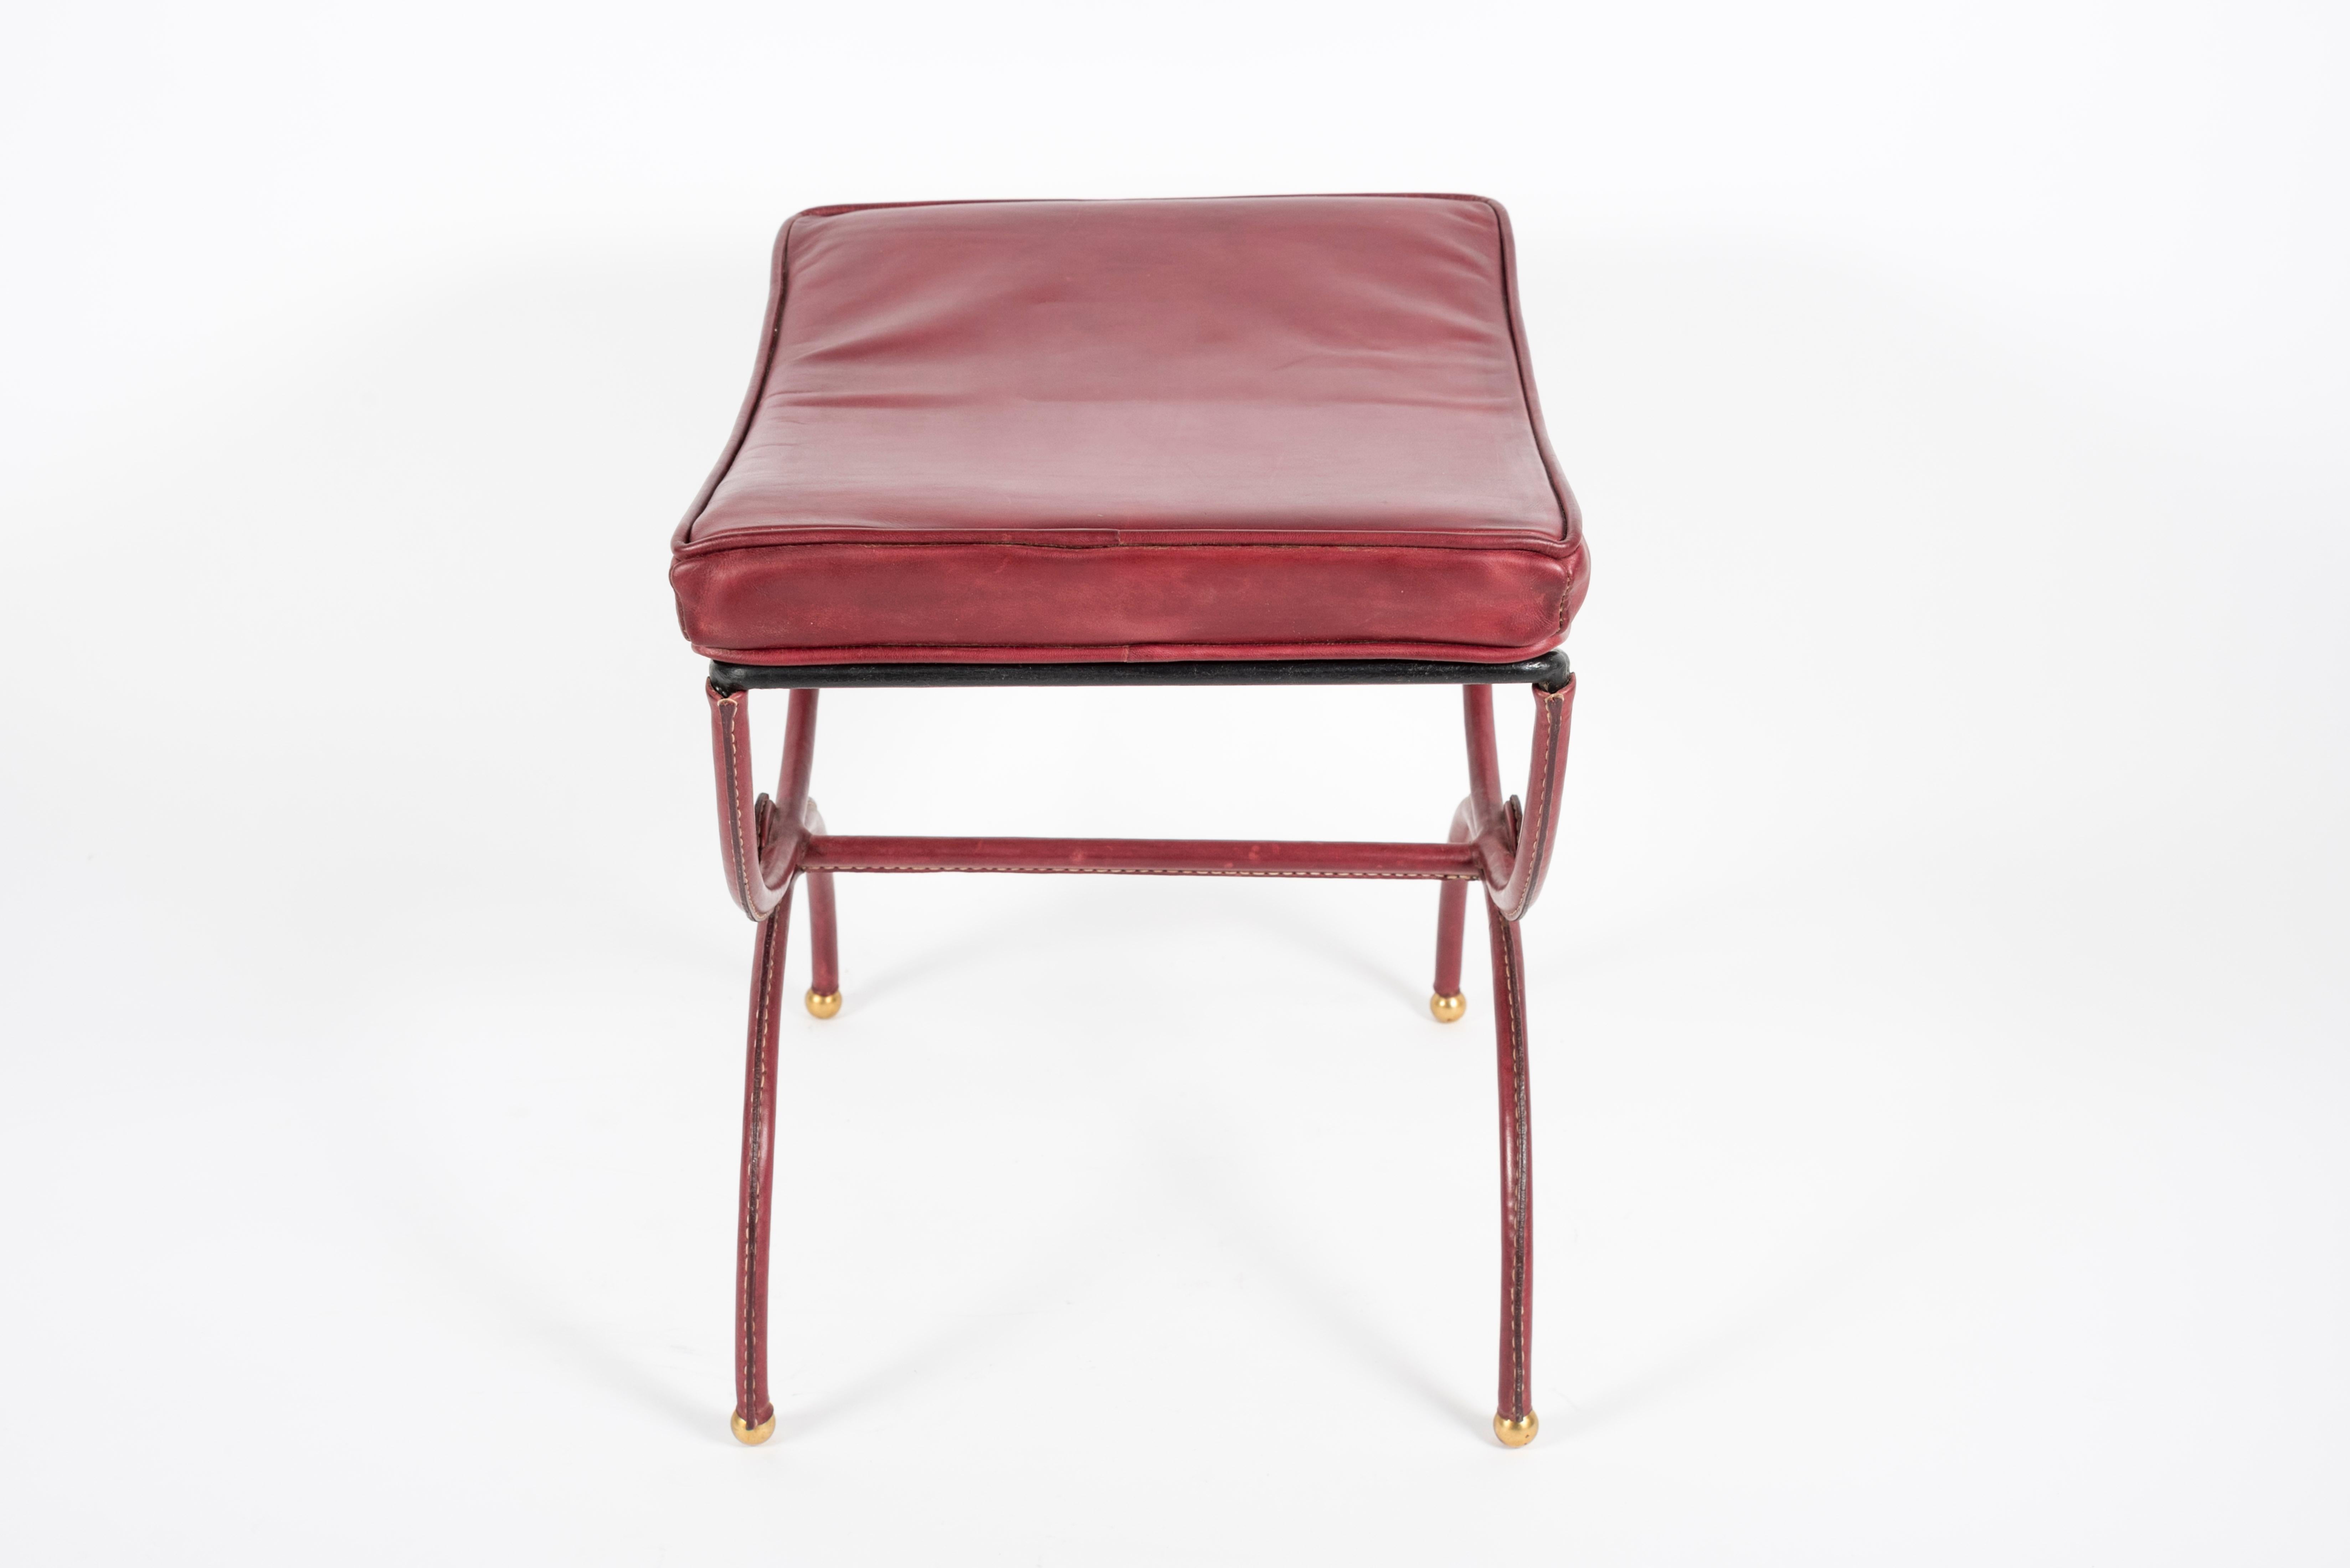 Pair of 1950s Stitched Leather Ottomans by Jacques Adnet For Sale 1